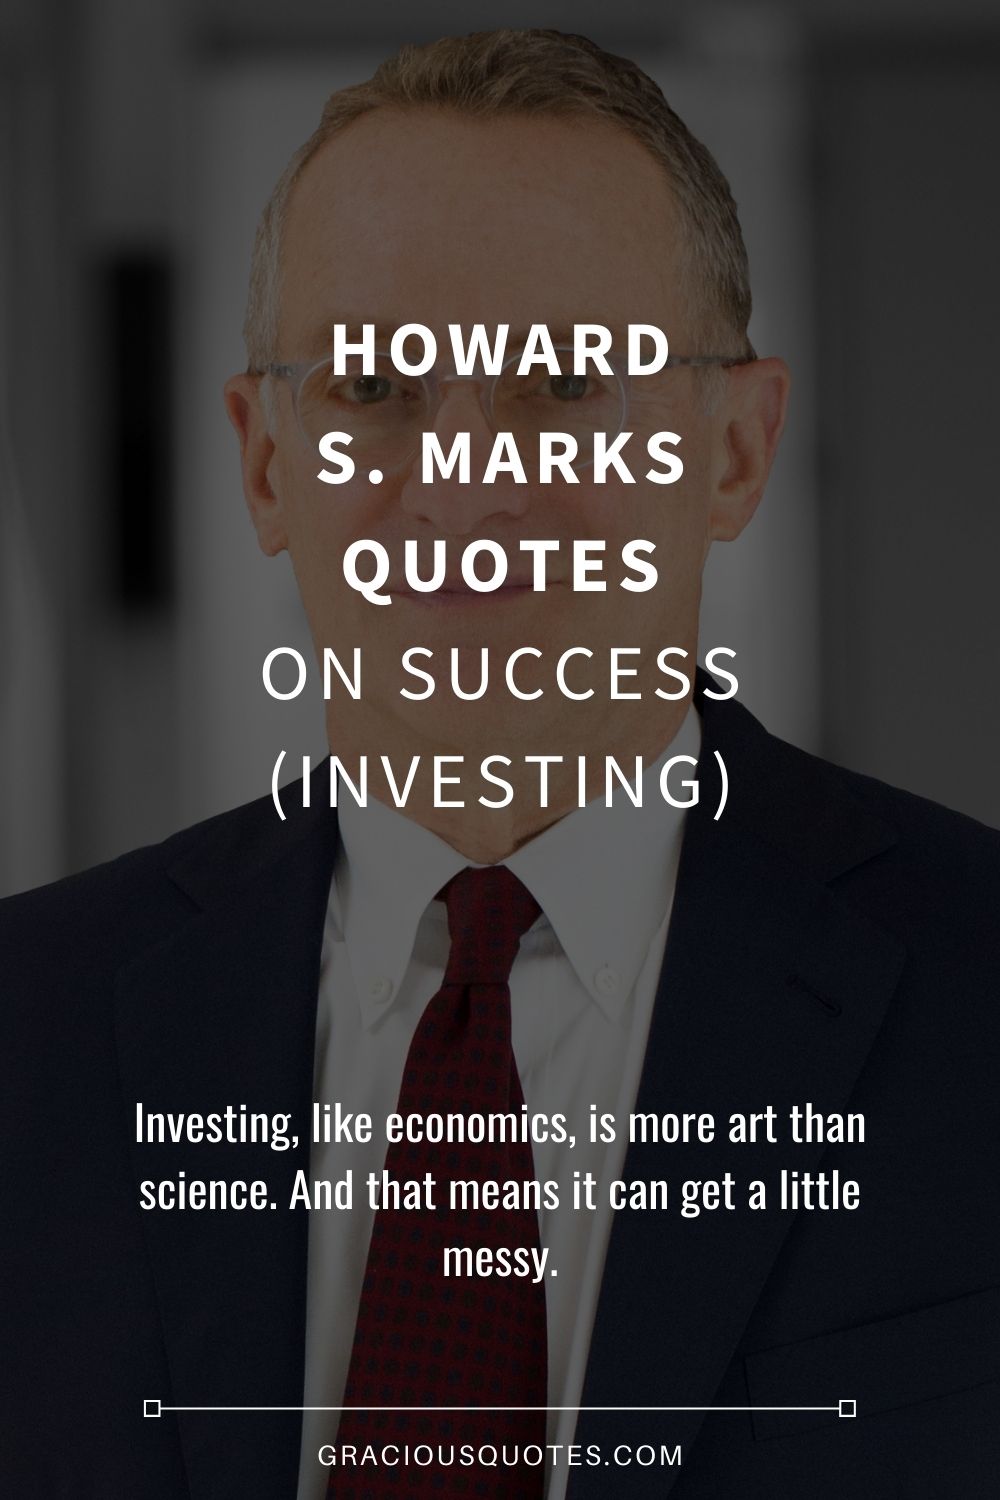 Howard S. Marks Quotes on Success (INVESTING) - Gracious Quotes